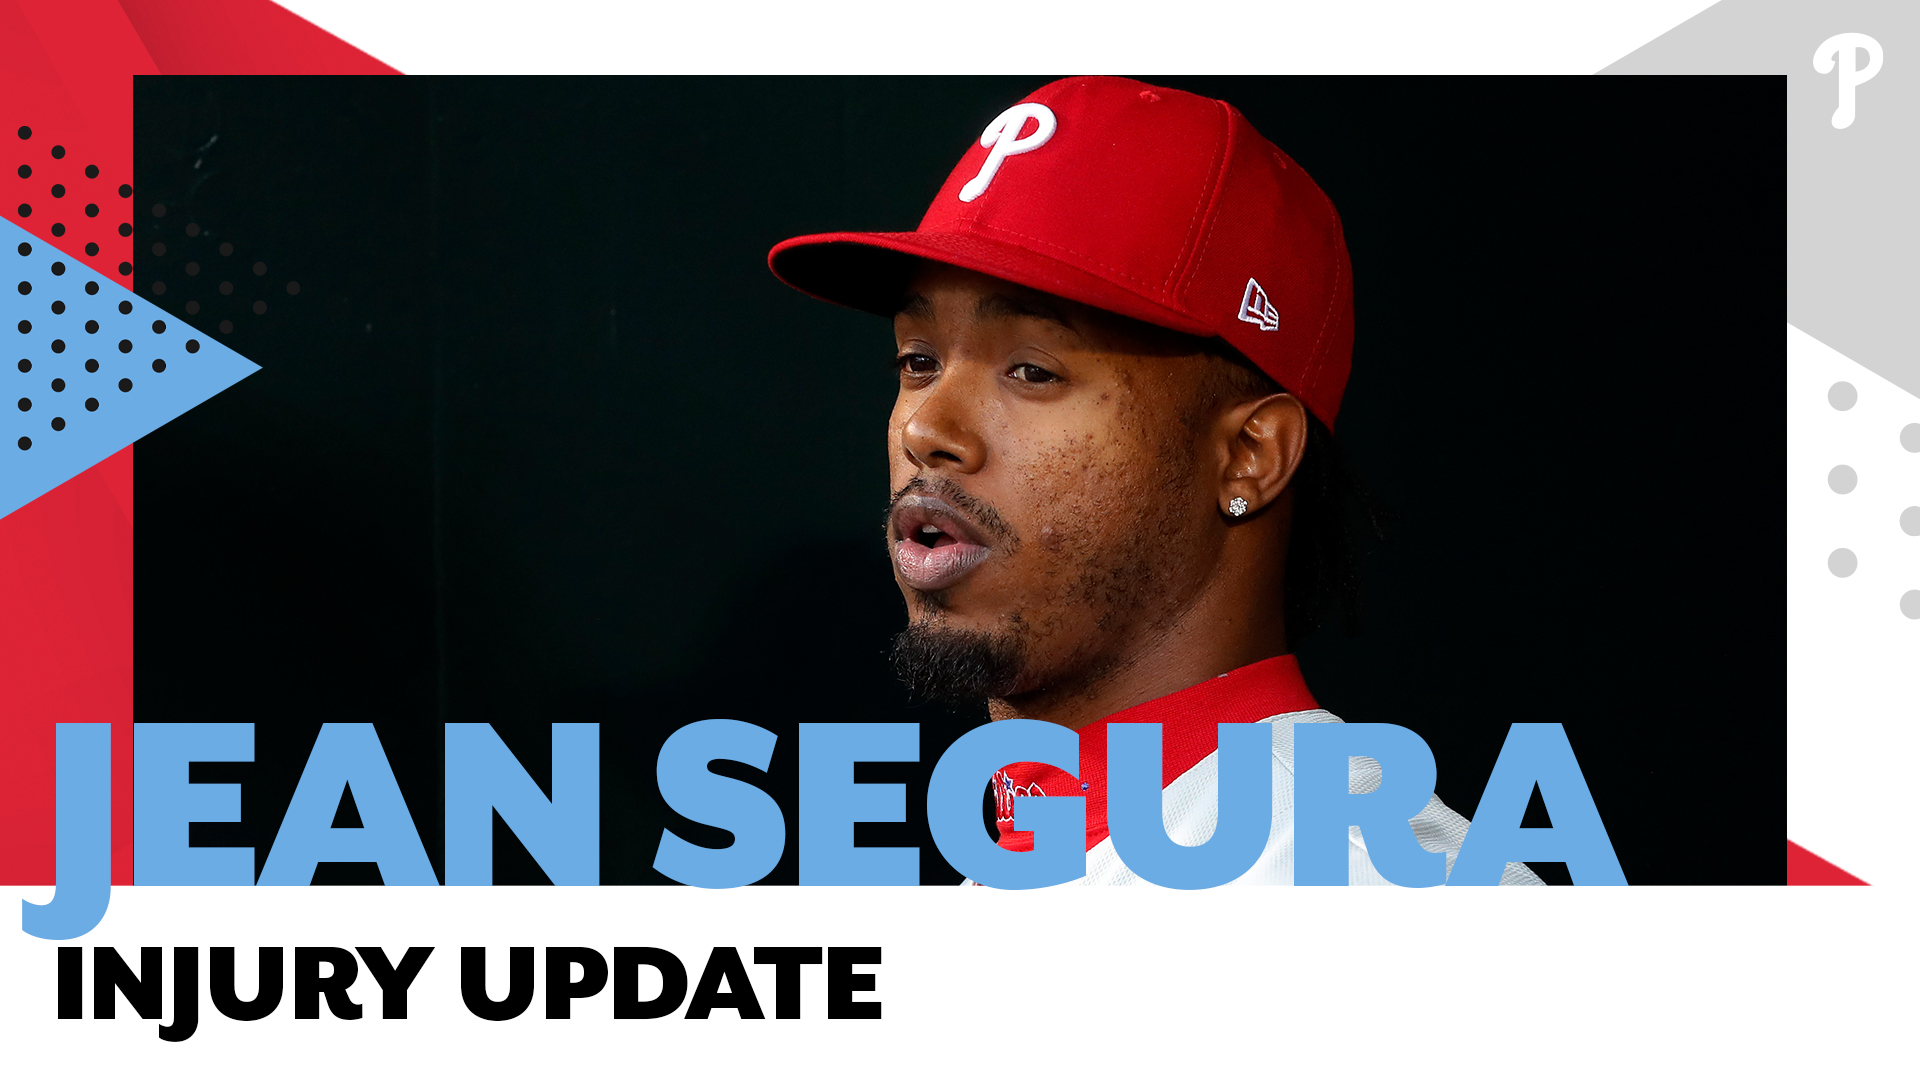 Jean Segura breaks his finger, out for a while - The Good Phight